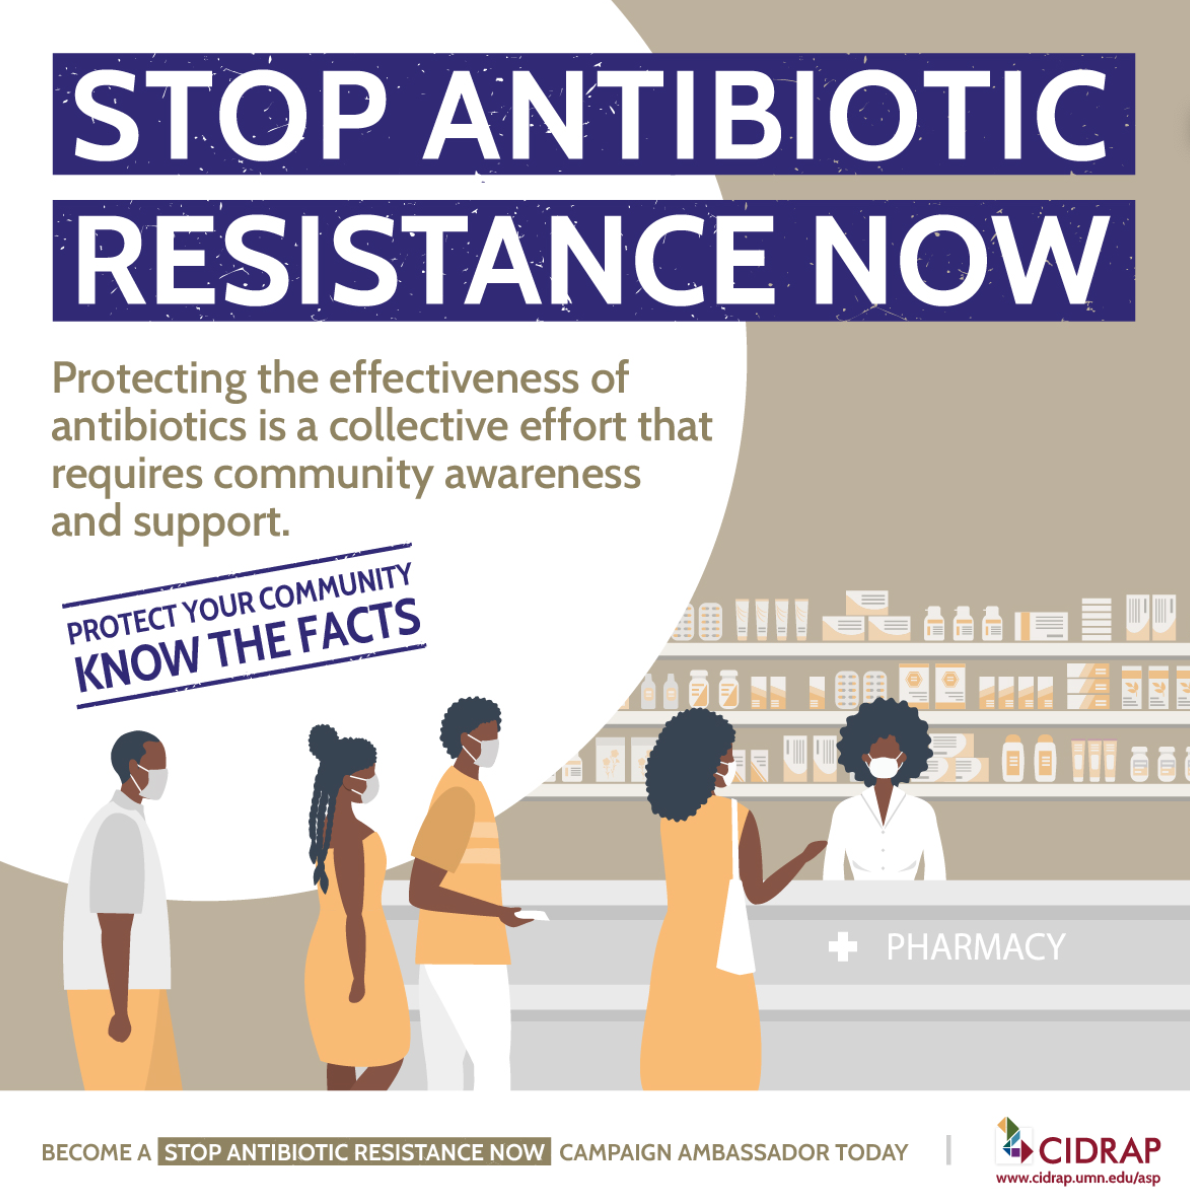 Four people wearing medical masks stand at a pharmacy counter behind which stands a pharmacist wearing a medical mast, and text reads "Stop Antibiotic Resistance Now. Protecting the effectiveness of antibiotics is a collective effort that requires community awareness and support. Protect your community. Know the facts. Become a stop antibiotic resistance now campaign ambassador today. CIDRAP www.cidrap.umn.edu/asp"